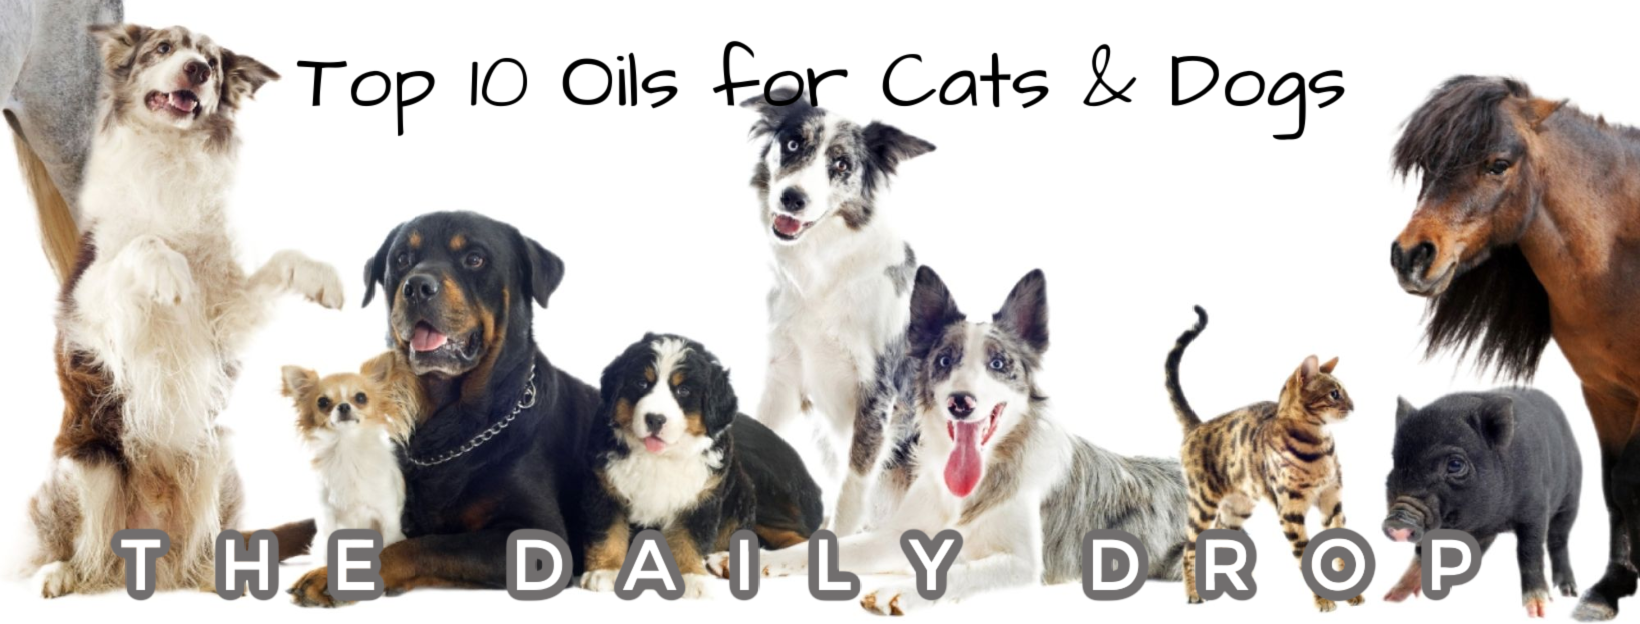 Top 10 Oils for Cats & Dogs | From Sandy